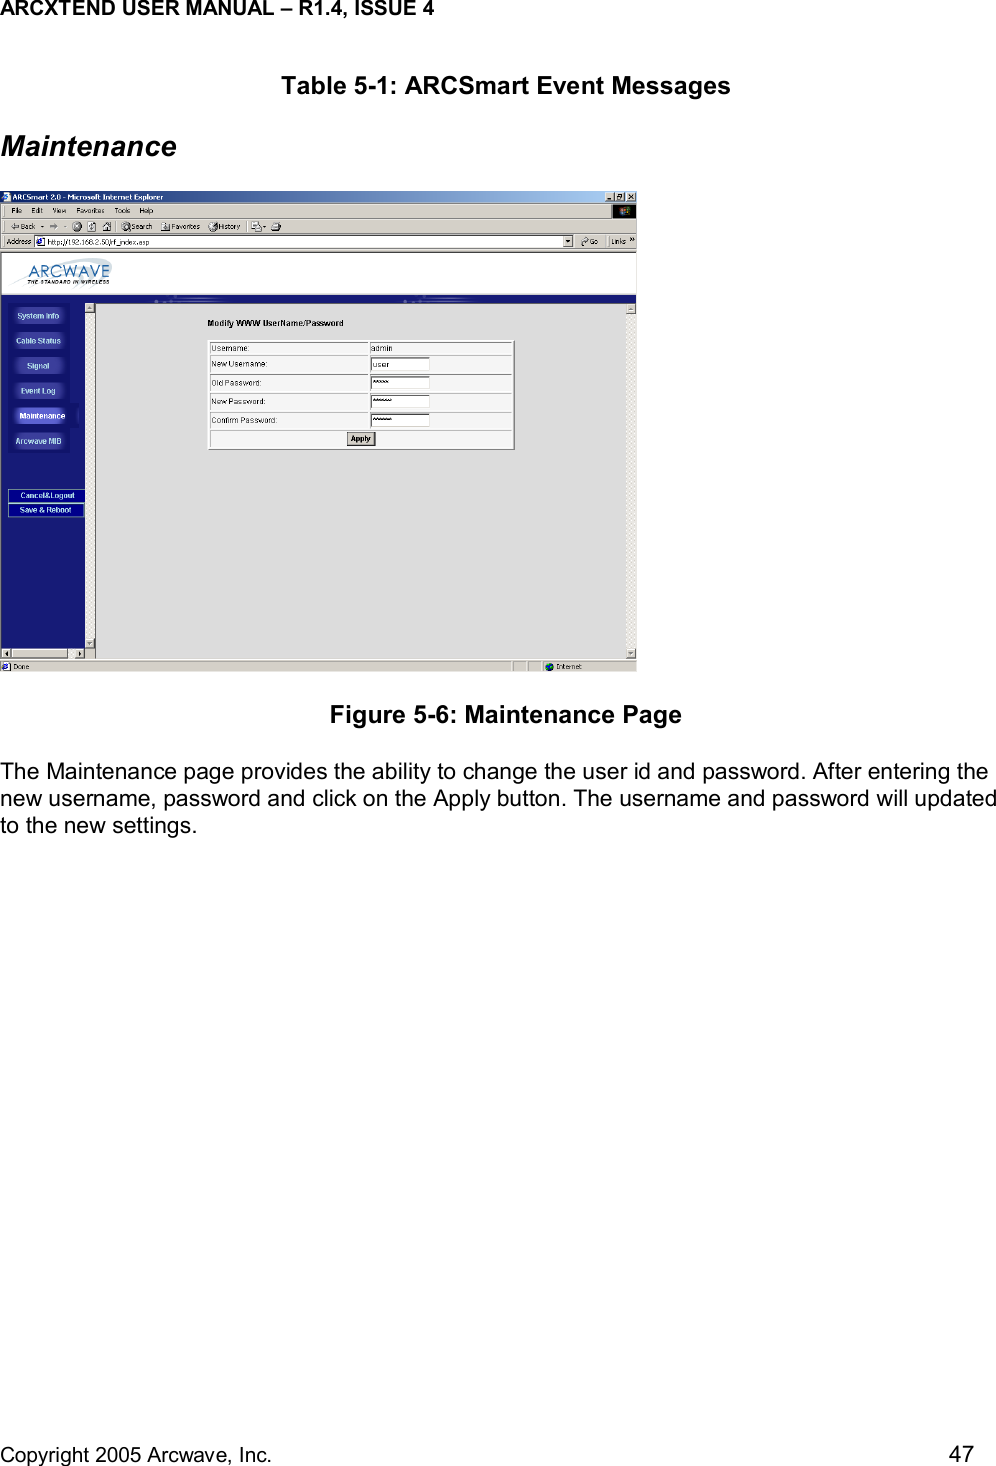 ARCXTEND USER MANUAL – R1.4, ISSUE 4  Copyright 2005 Arcwave, Inc.    47 Table 5-1: ARCSmart Event Messages Maintenance  Figure 5-6: Maintenance Page The Maintenance page provides the ability to change the user id and password. After entering the new username, password and click on the Apply button. The username and password will updated to the new settings.   